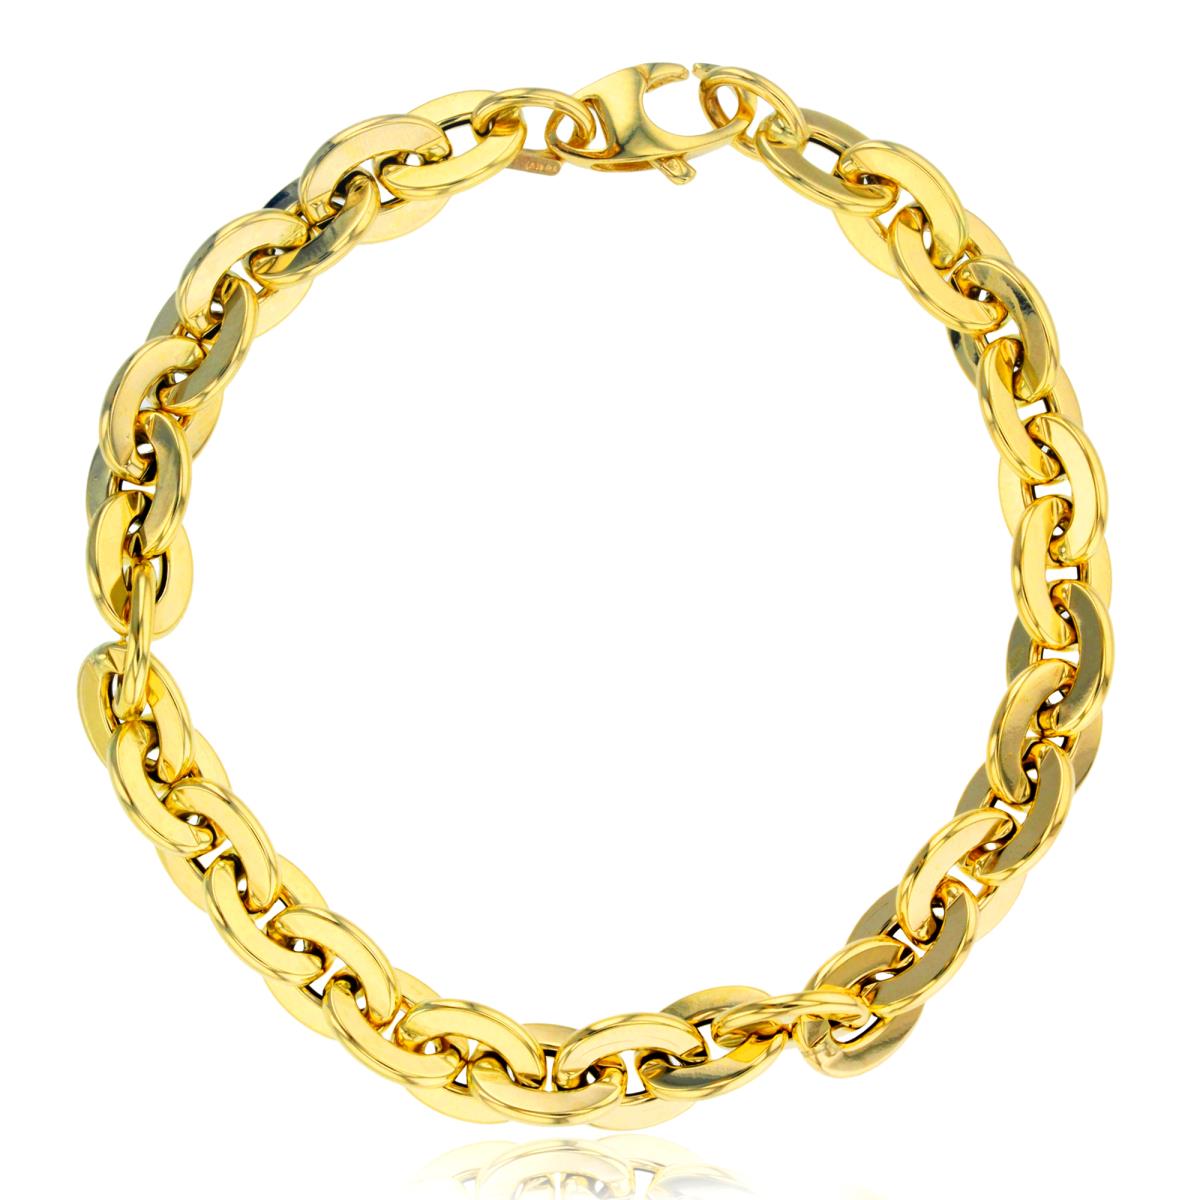 10K Yellow Gold Polished Flat Cable 7.5" Chain Bracelet